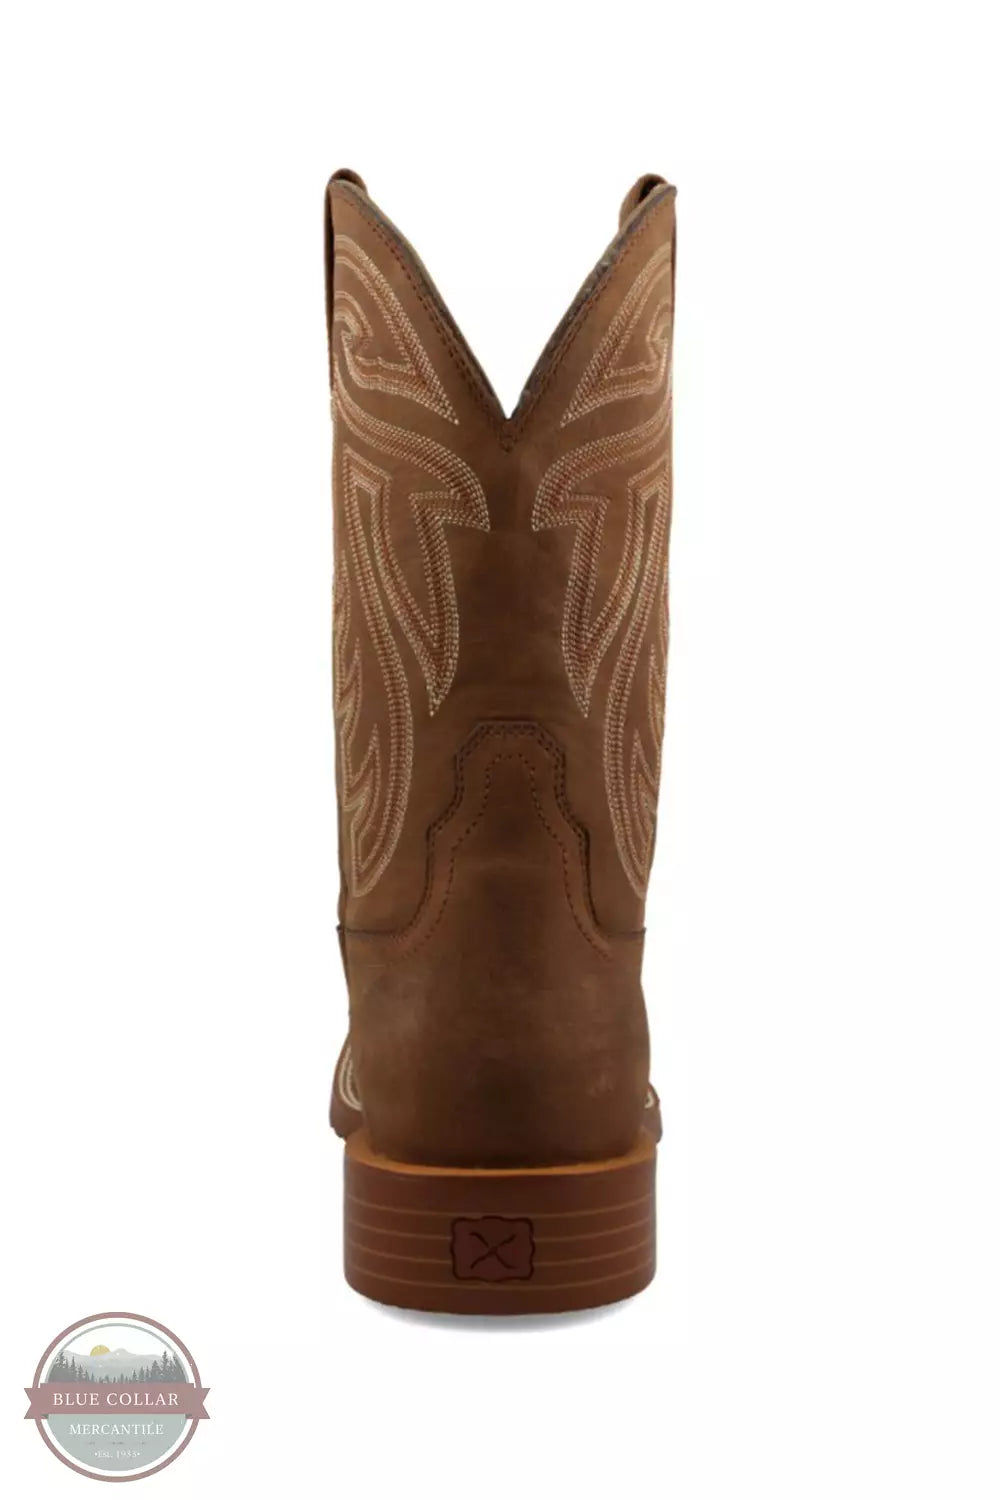 Twisted X MXTR016 Tech X 11 Inch Western Boot in Coffee Heel View